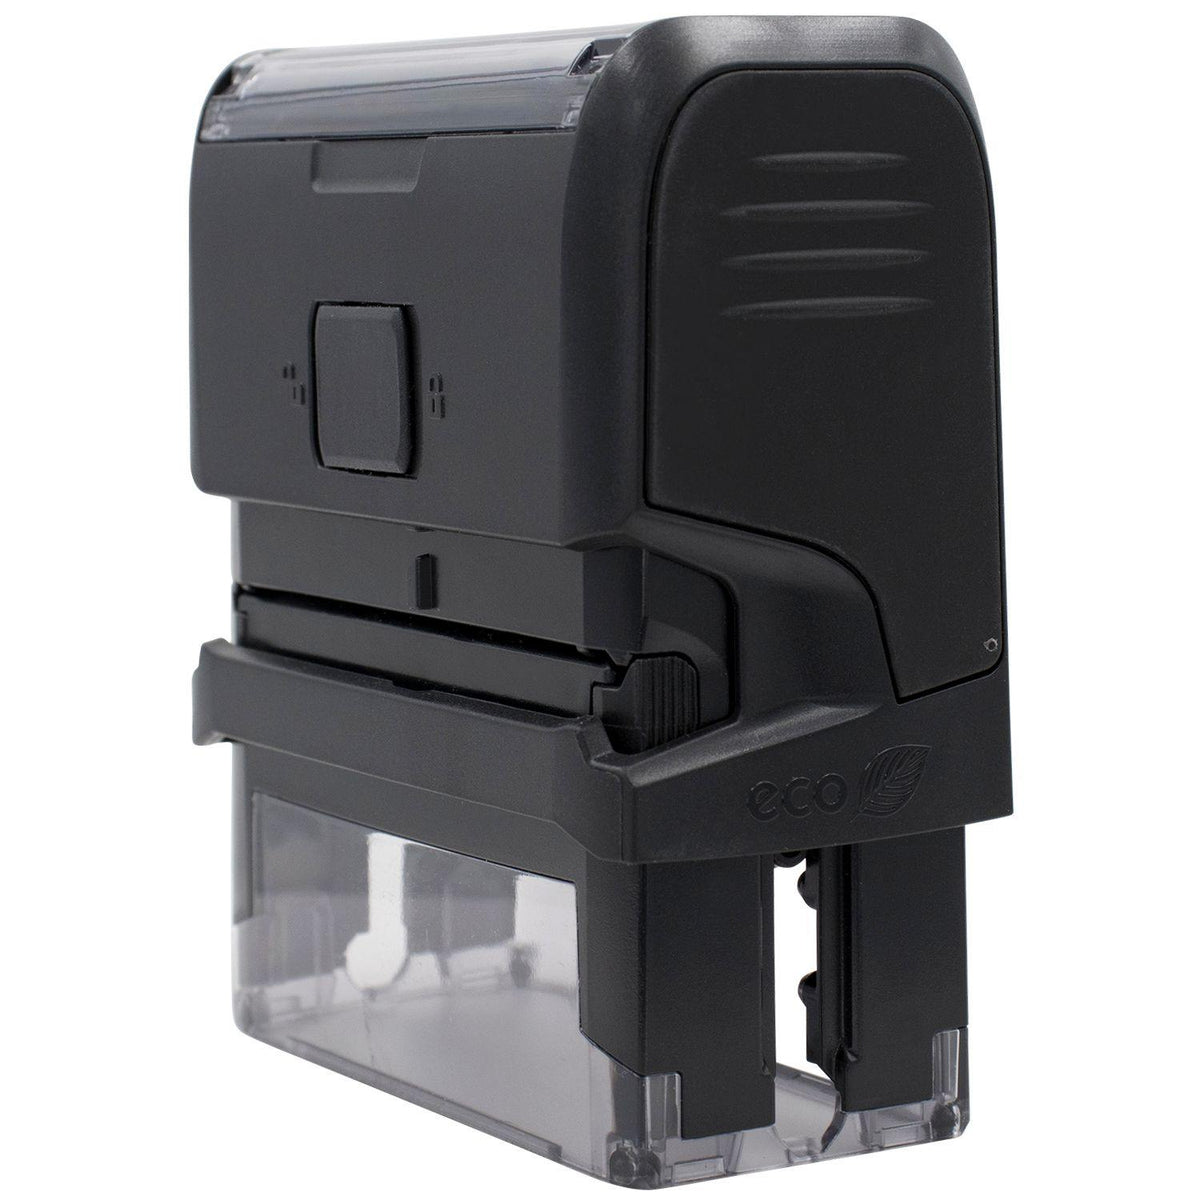 Self Inking Completed Together In Class Stamp - Engineer Seal Stamps - Brand_Trodat, Impression Size_Small, Stamp Type_Self-Inking Stamp, Type of Use_Teacher